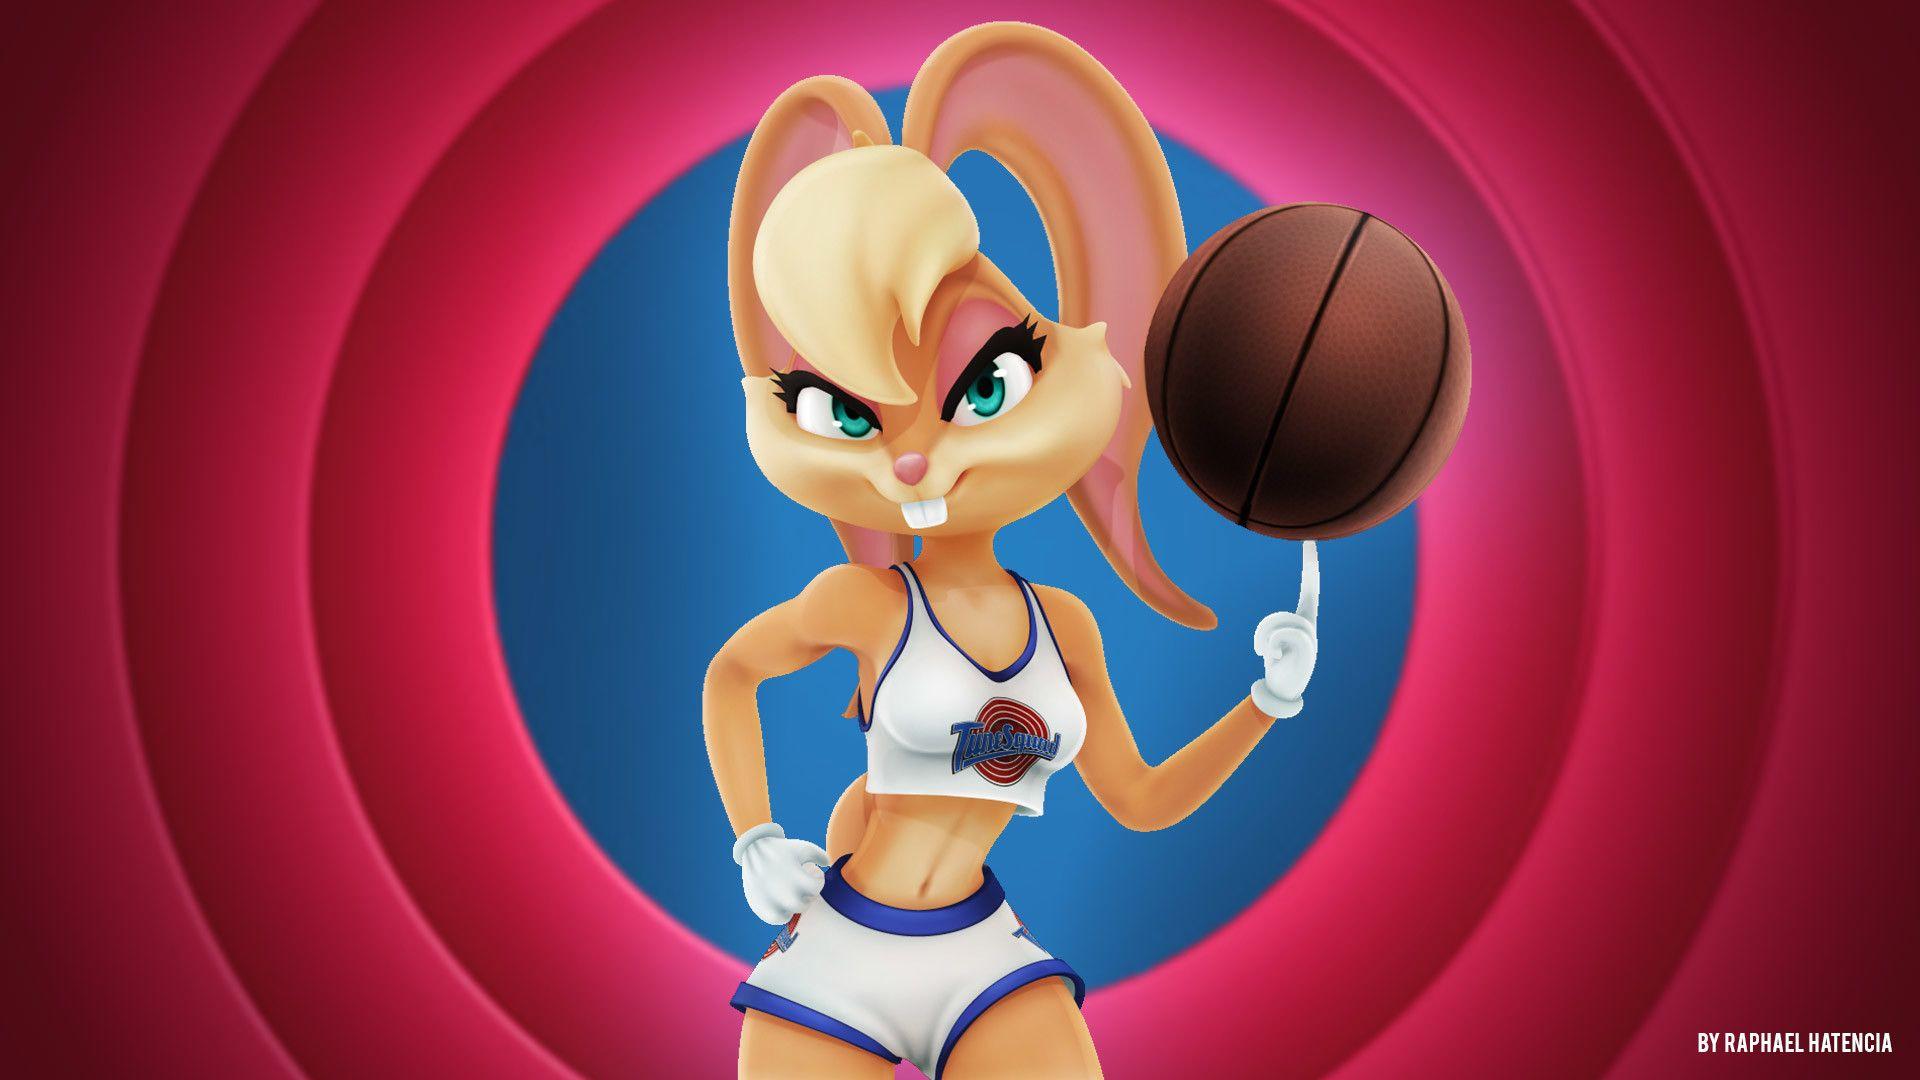 Lola Bunny Wallpapers Top Free Lola Bunny Backgrounds Wallpaperaccess Space jam bugs bunny cartoon wallpaper looney tunes tinkerbell good movies movies and tv shows photo galleries places to visit. lola bunny wallpapers top free lola